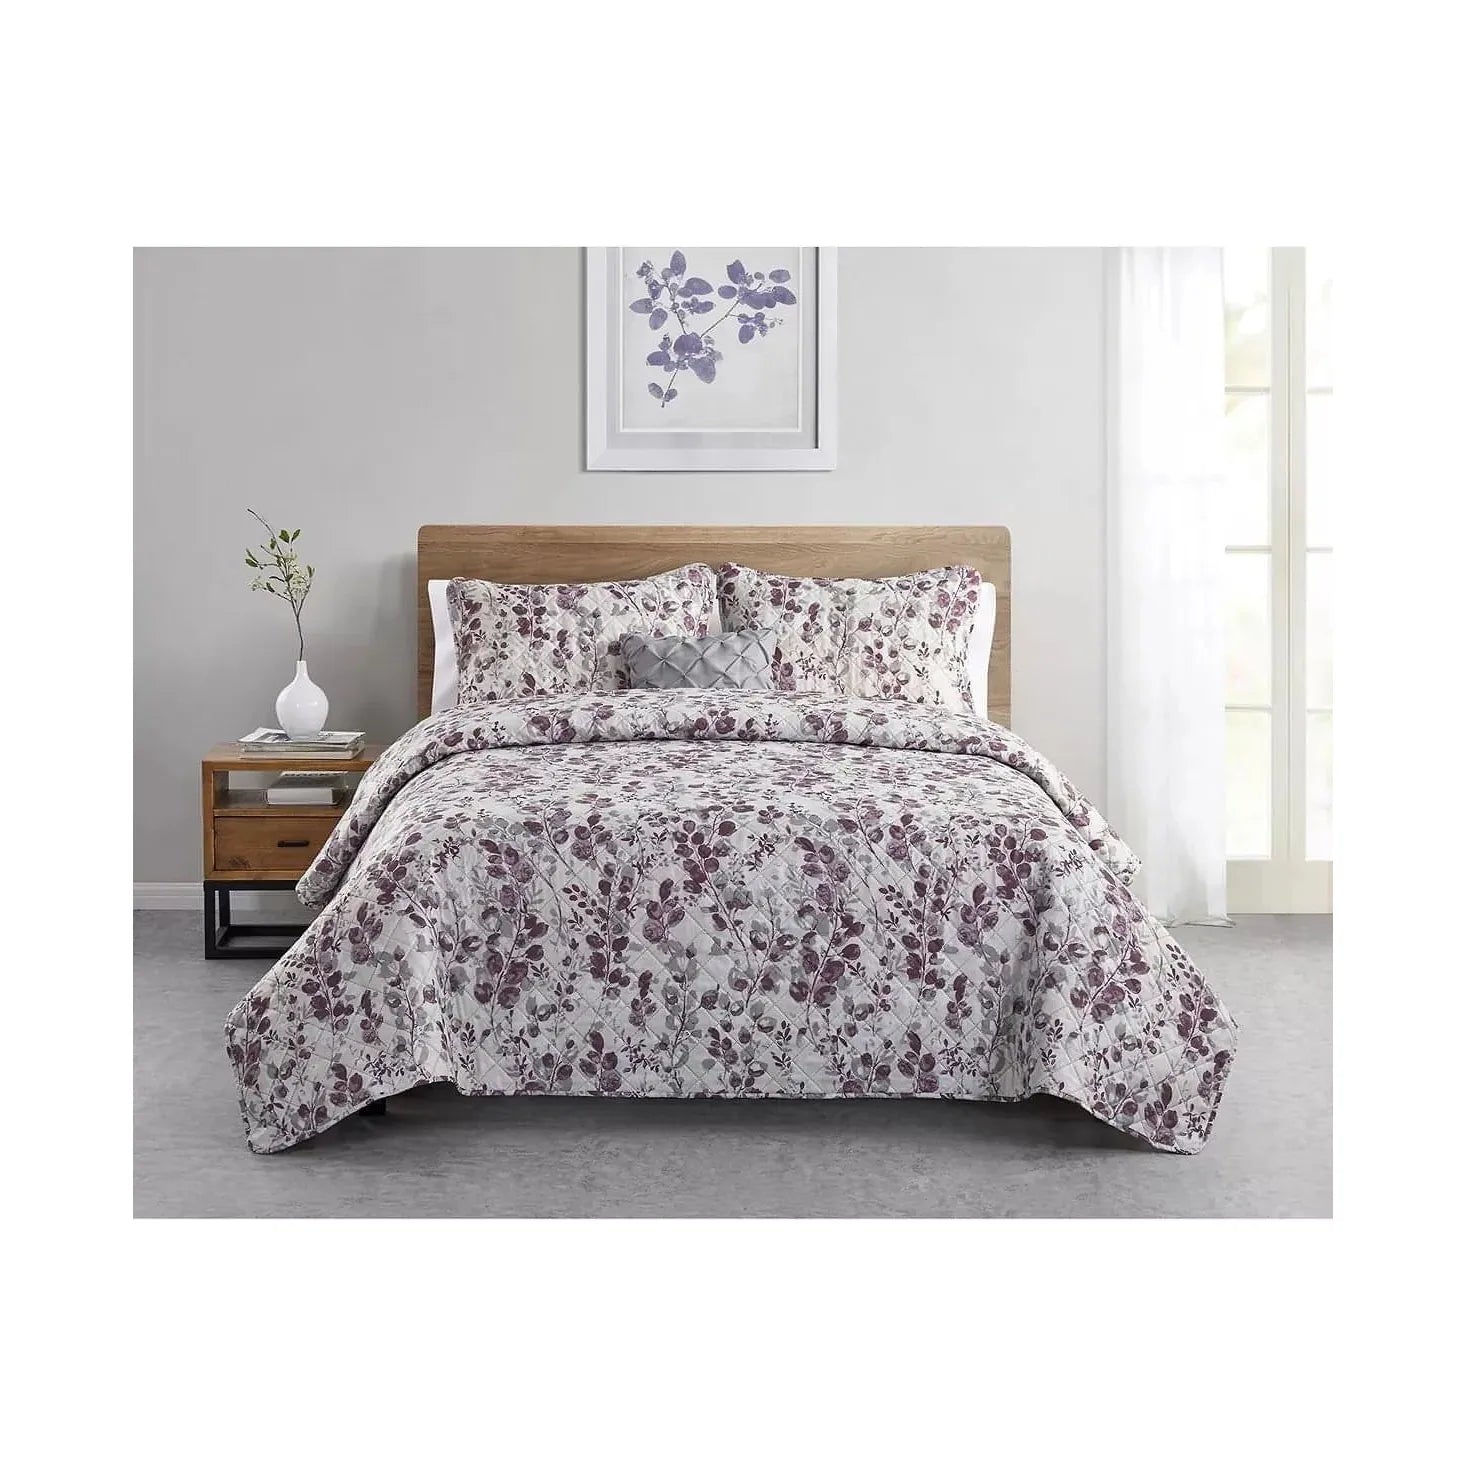 VCNY Home Wisteria 4pc Quilt Set Full/Queen, Purple - Brandat Outlet